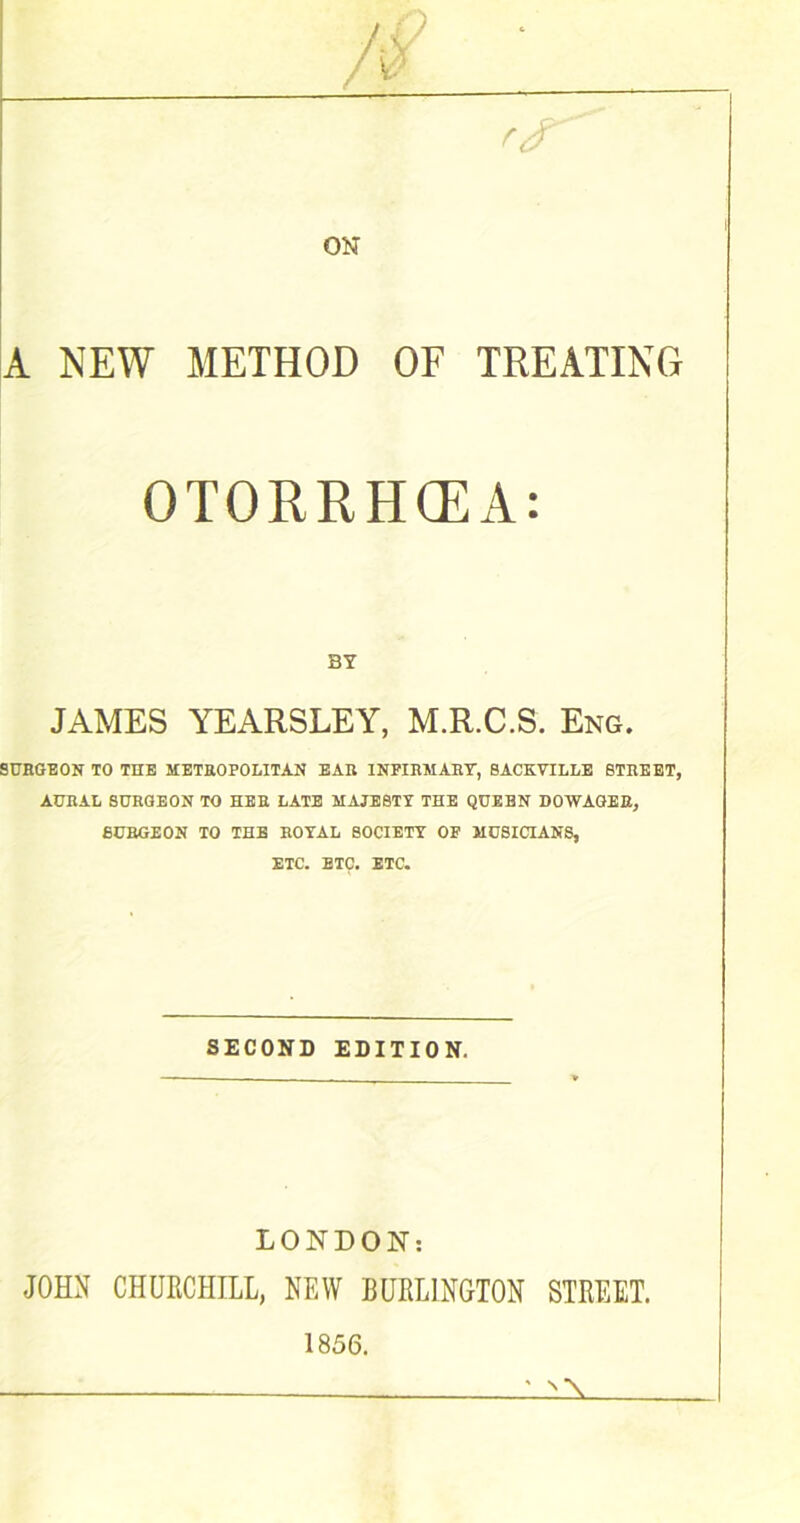 r<r A NEW METHOD OF TREATING OTORRHCEA: BY JAMES YEARSLEY, M.R.C.S. Eng. SURGEON TO THE METROPOLITAN EAR INFIRMARY, SACKVILLE STREET, AURAL SURGEON TO HER LATE MAJESTY THE QUEBN DOWAGER, SURGEON TO THE ROYAL SOCIETY OF MUSICIANS, ETC. ETC. ETC. SECOND EDITION. LONDON: JOHN CHURCHILL, NEW BURLINGTON STREET. 1856. ' N \